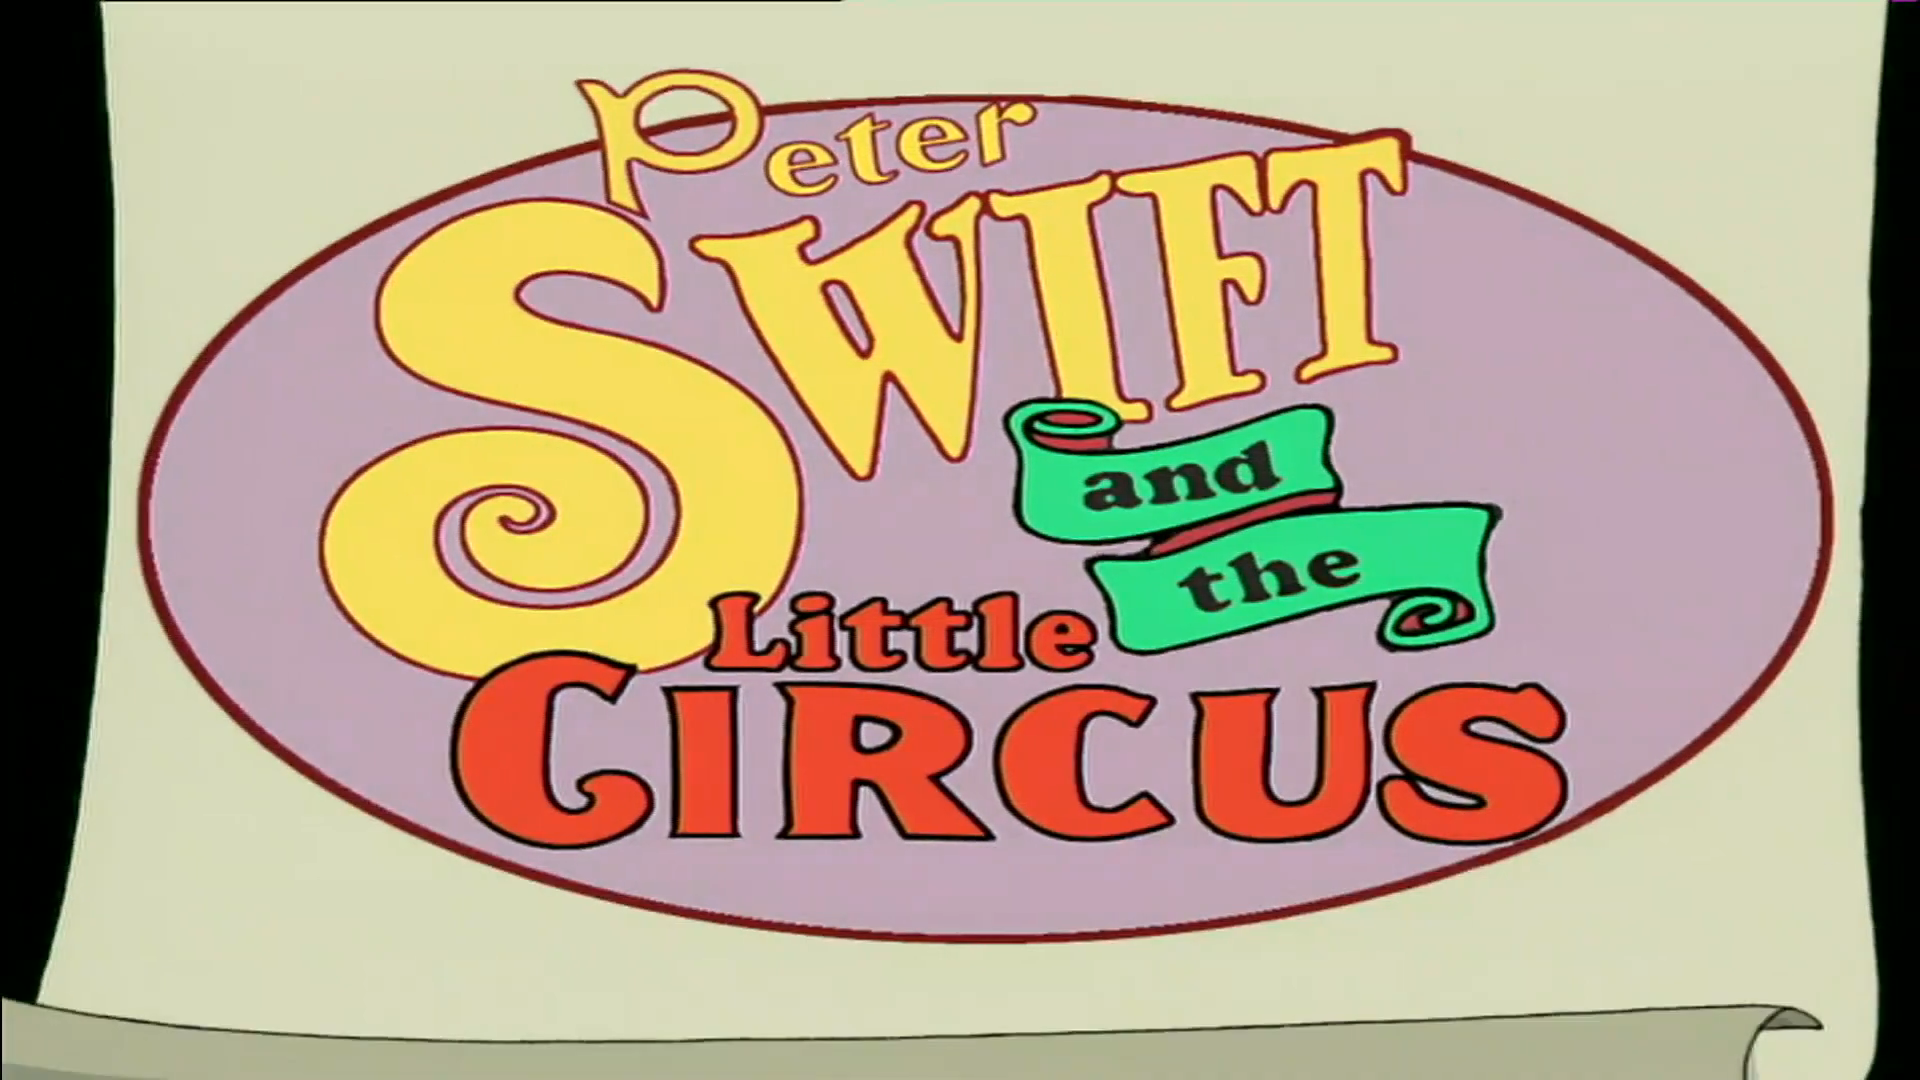 Peter Swift and the Little Circus Episode 8 English - Peter Swift and the Little Circus (partially found English dub of "Peter Swift et le Petit Cirque" animated series; 2004)